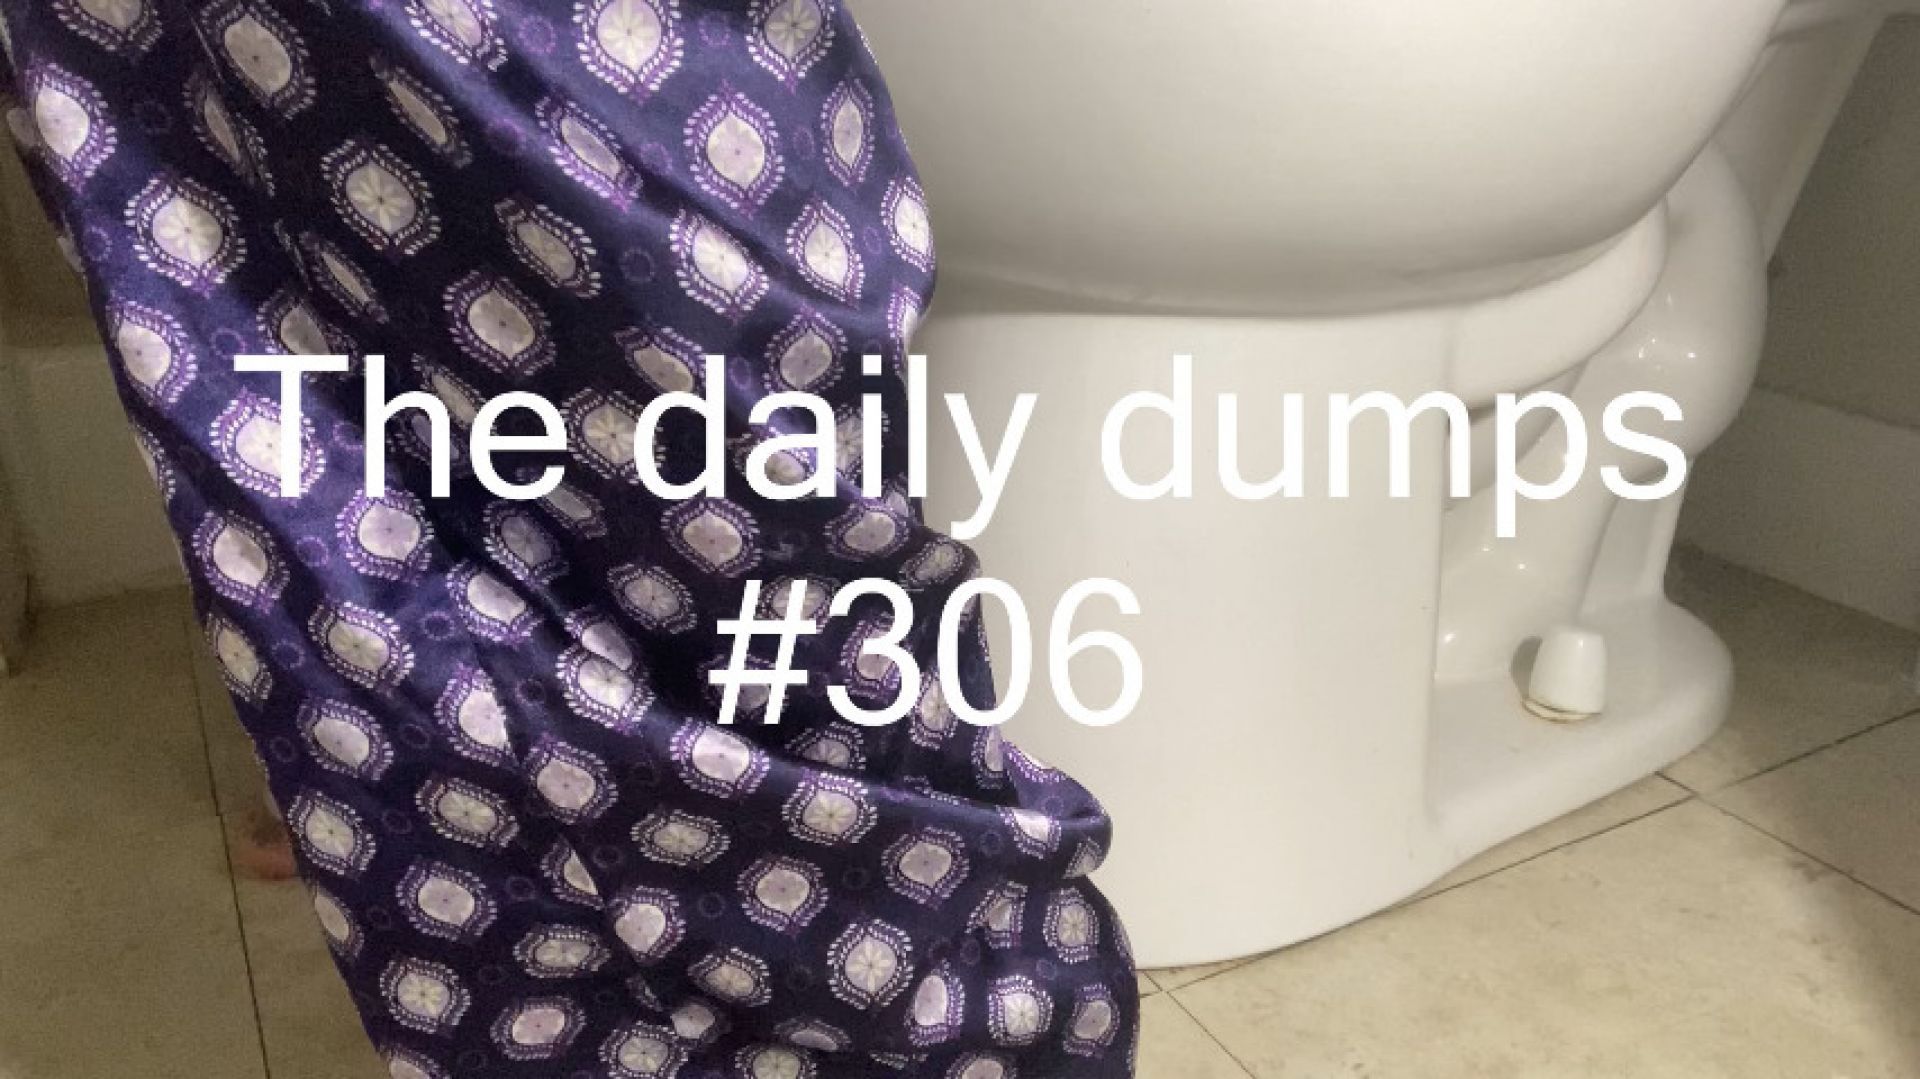 The daily dumps #306